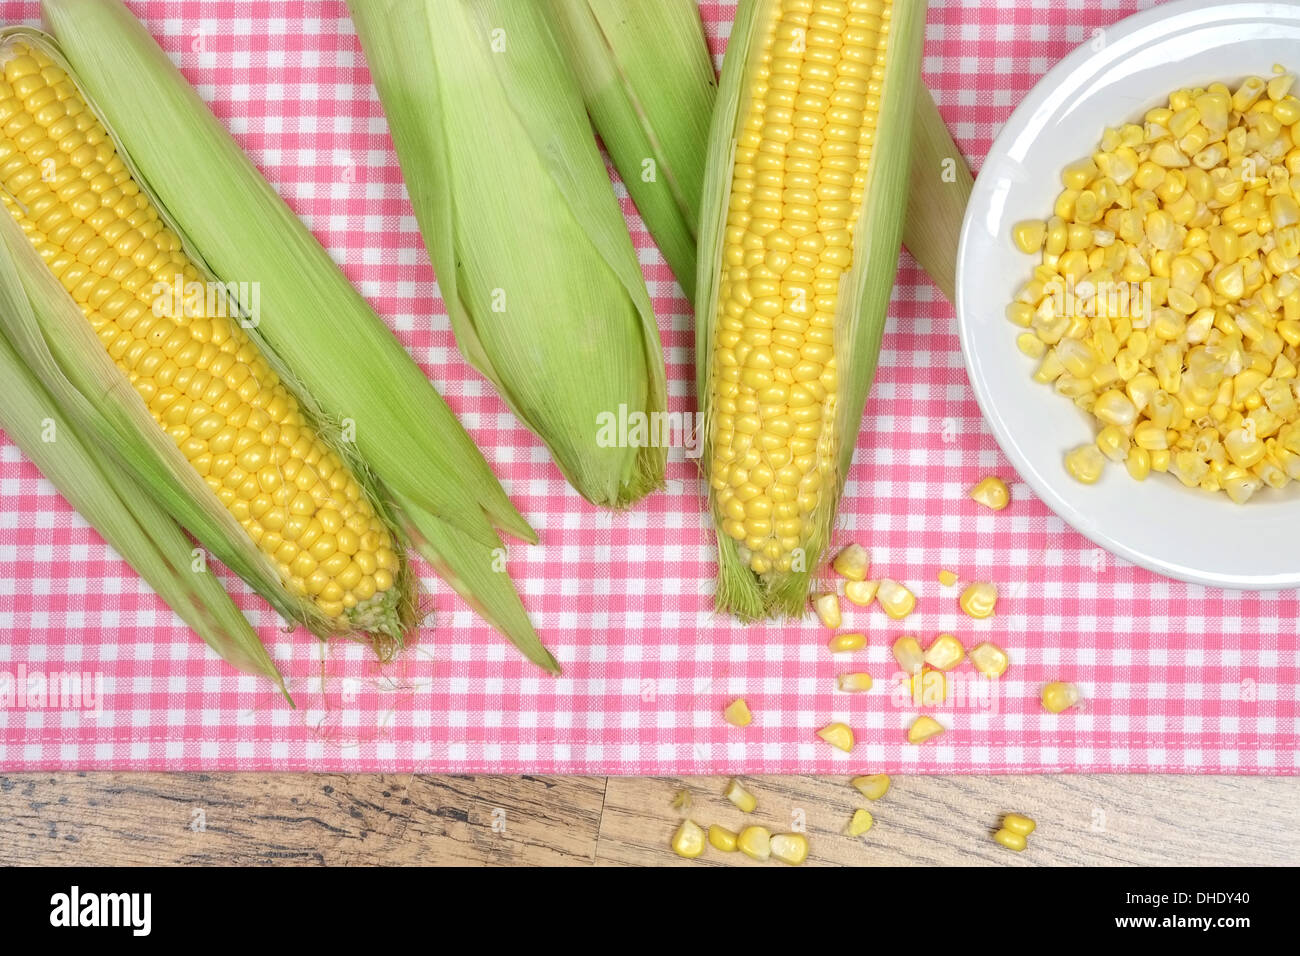 A bowl of sweetcorn and corn on the cob placed on a pink checker pattern tablecloth Stock Photo